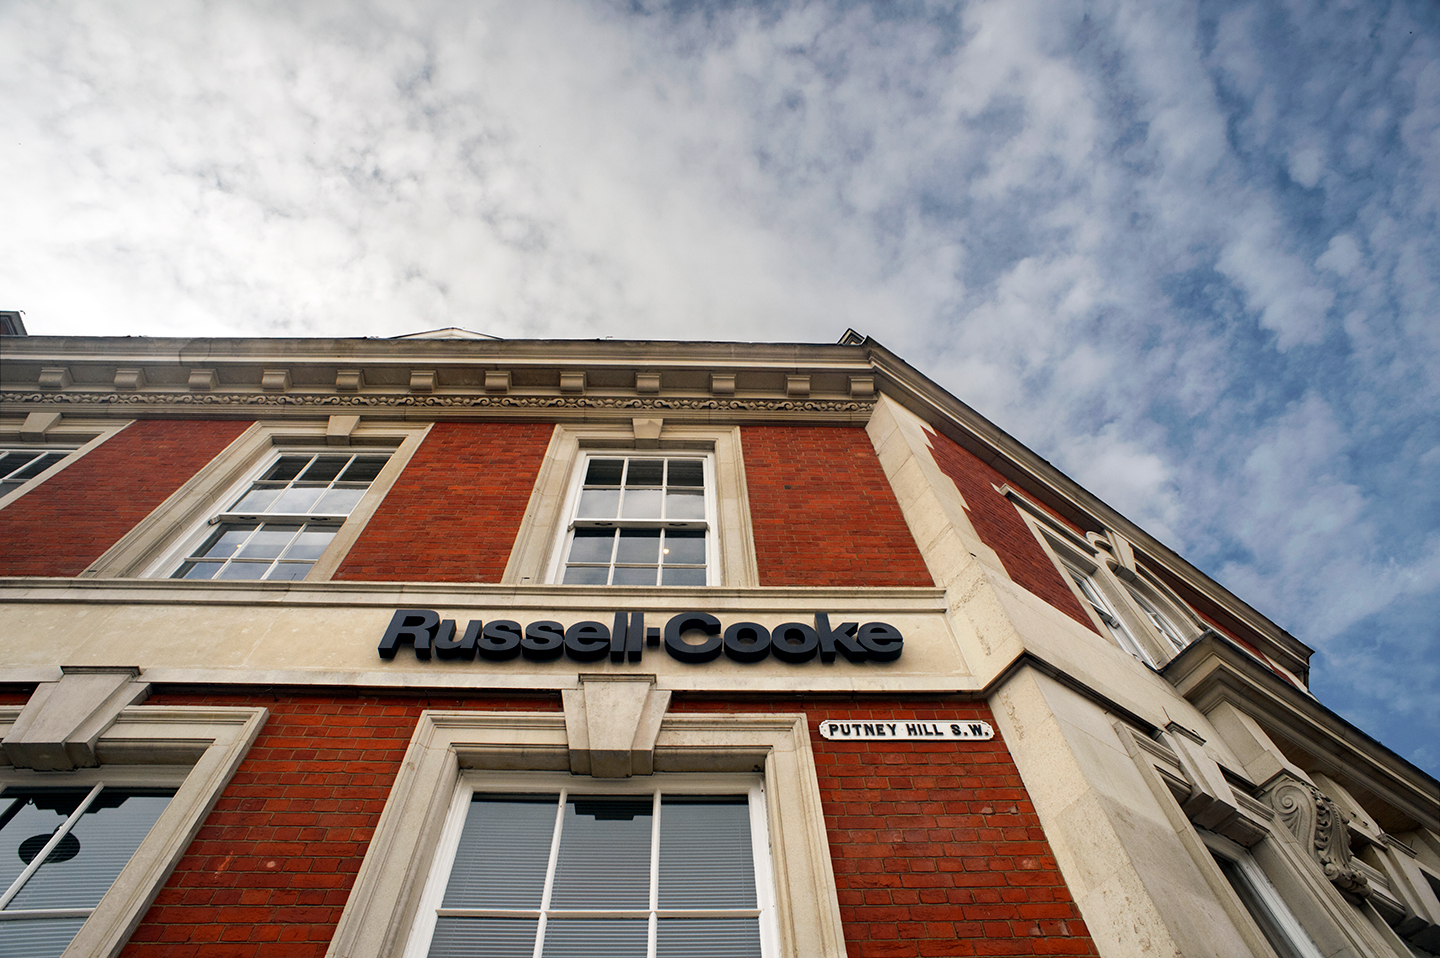 Russell-Cooke Solicitors, 2 Putney Hill